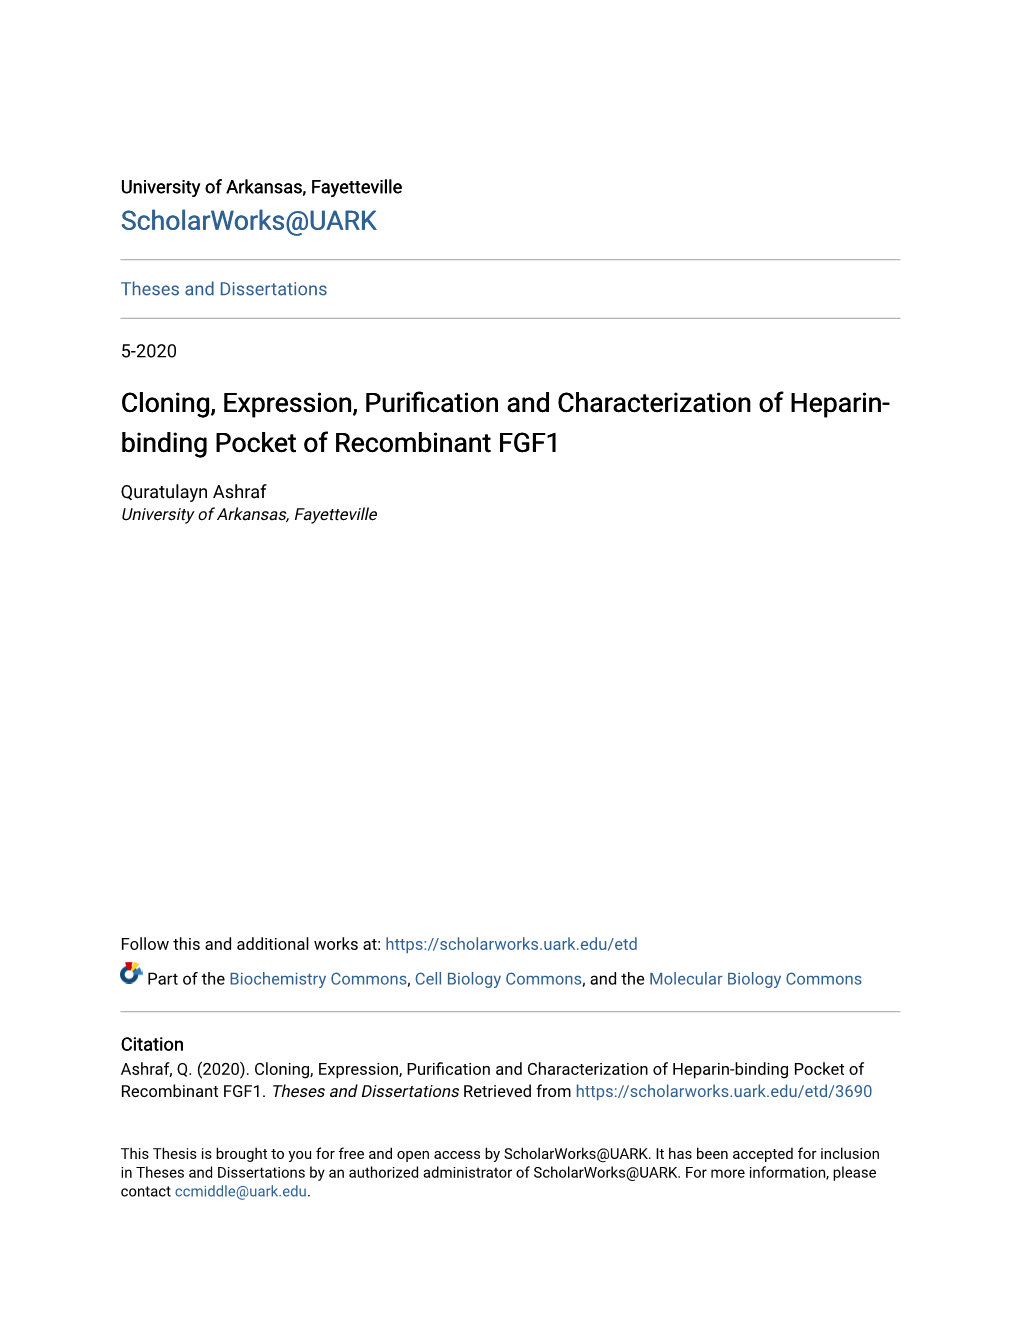 Cloning, Expression, Purification and Characterization of Heparin-Binding Pocket of Recombinant FGF1